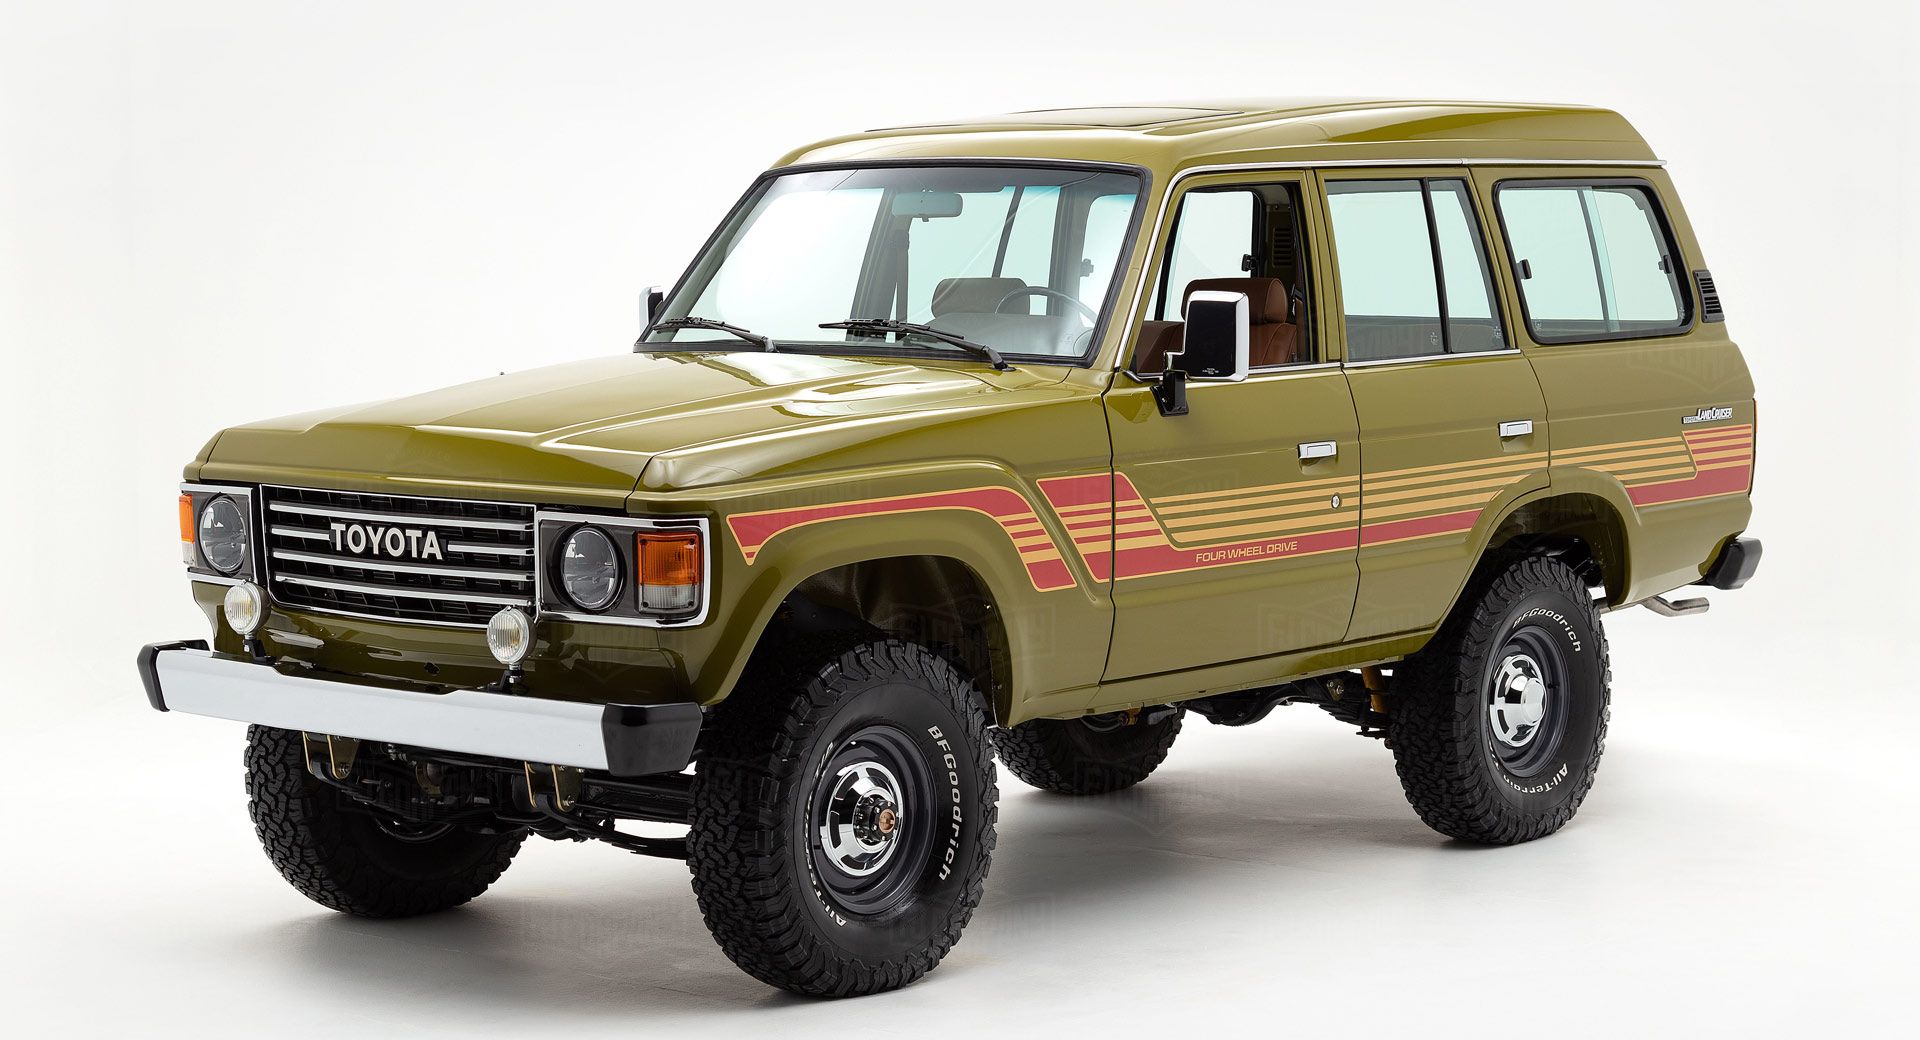 Restomod '86 Toyota Land Cruiser Is From Another Time | Carscoops